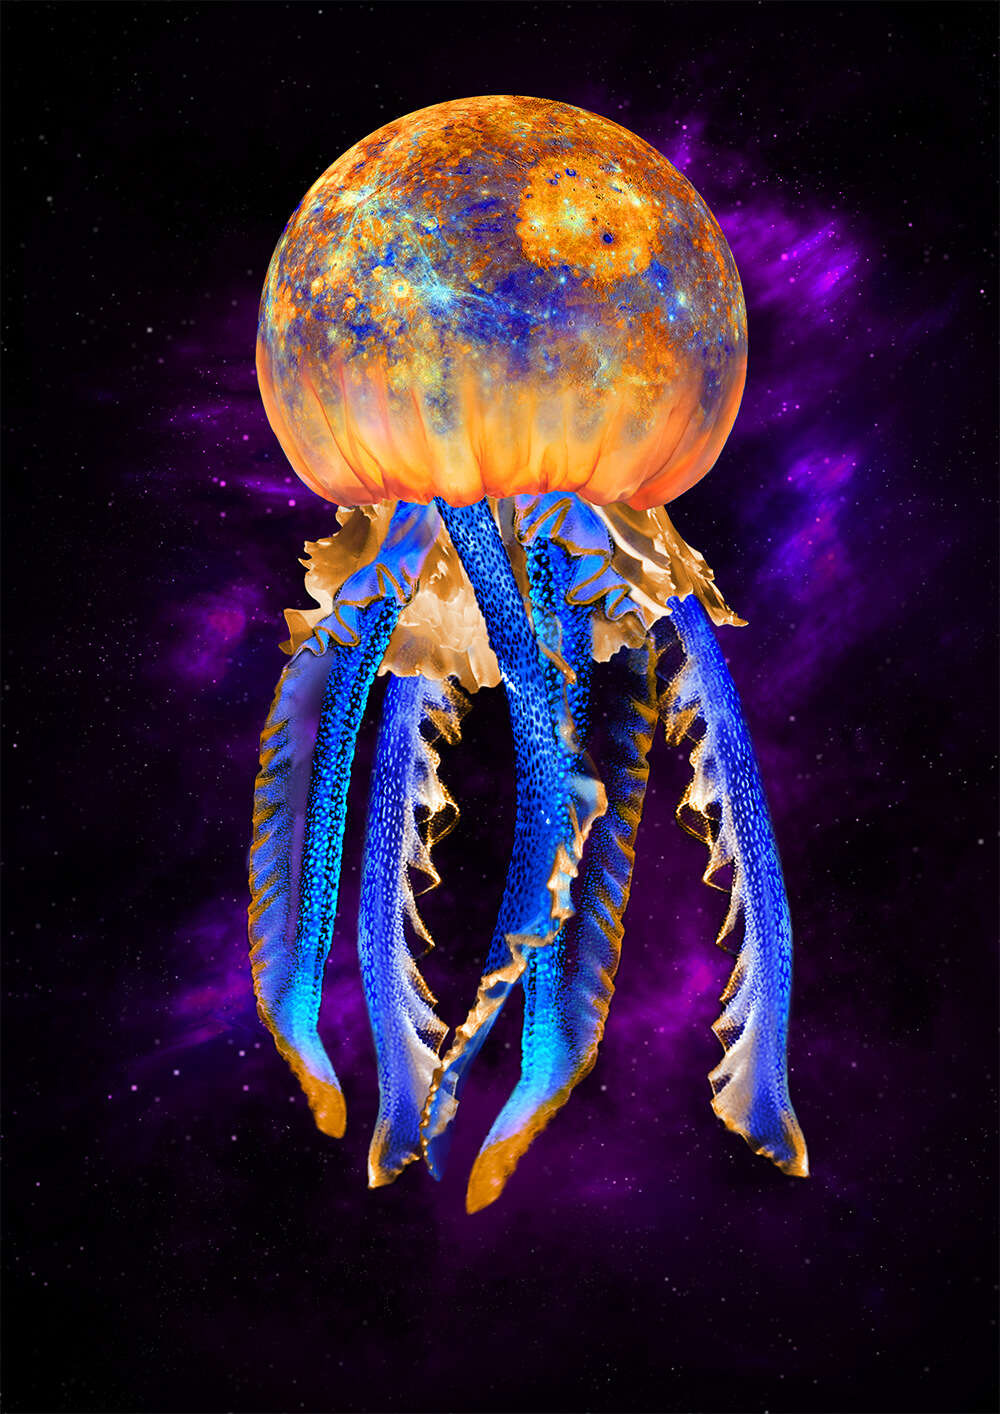 Planet Mercury with jellyfish tentacles